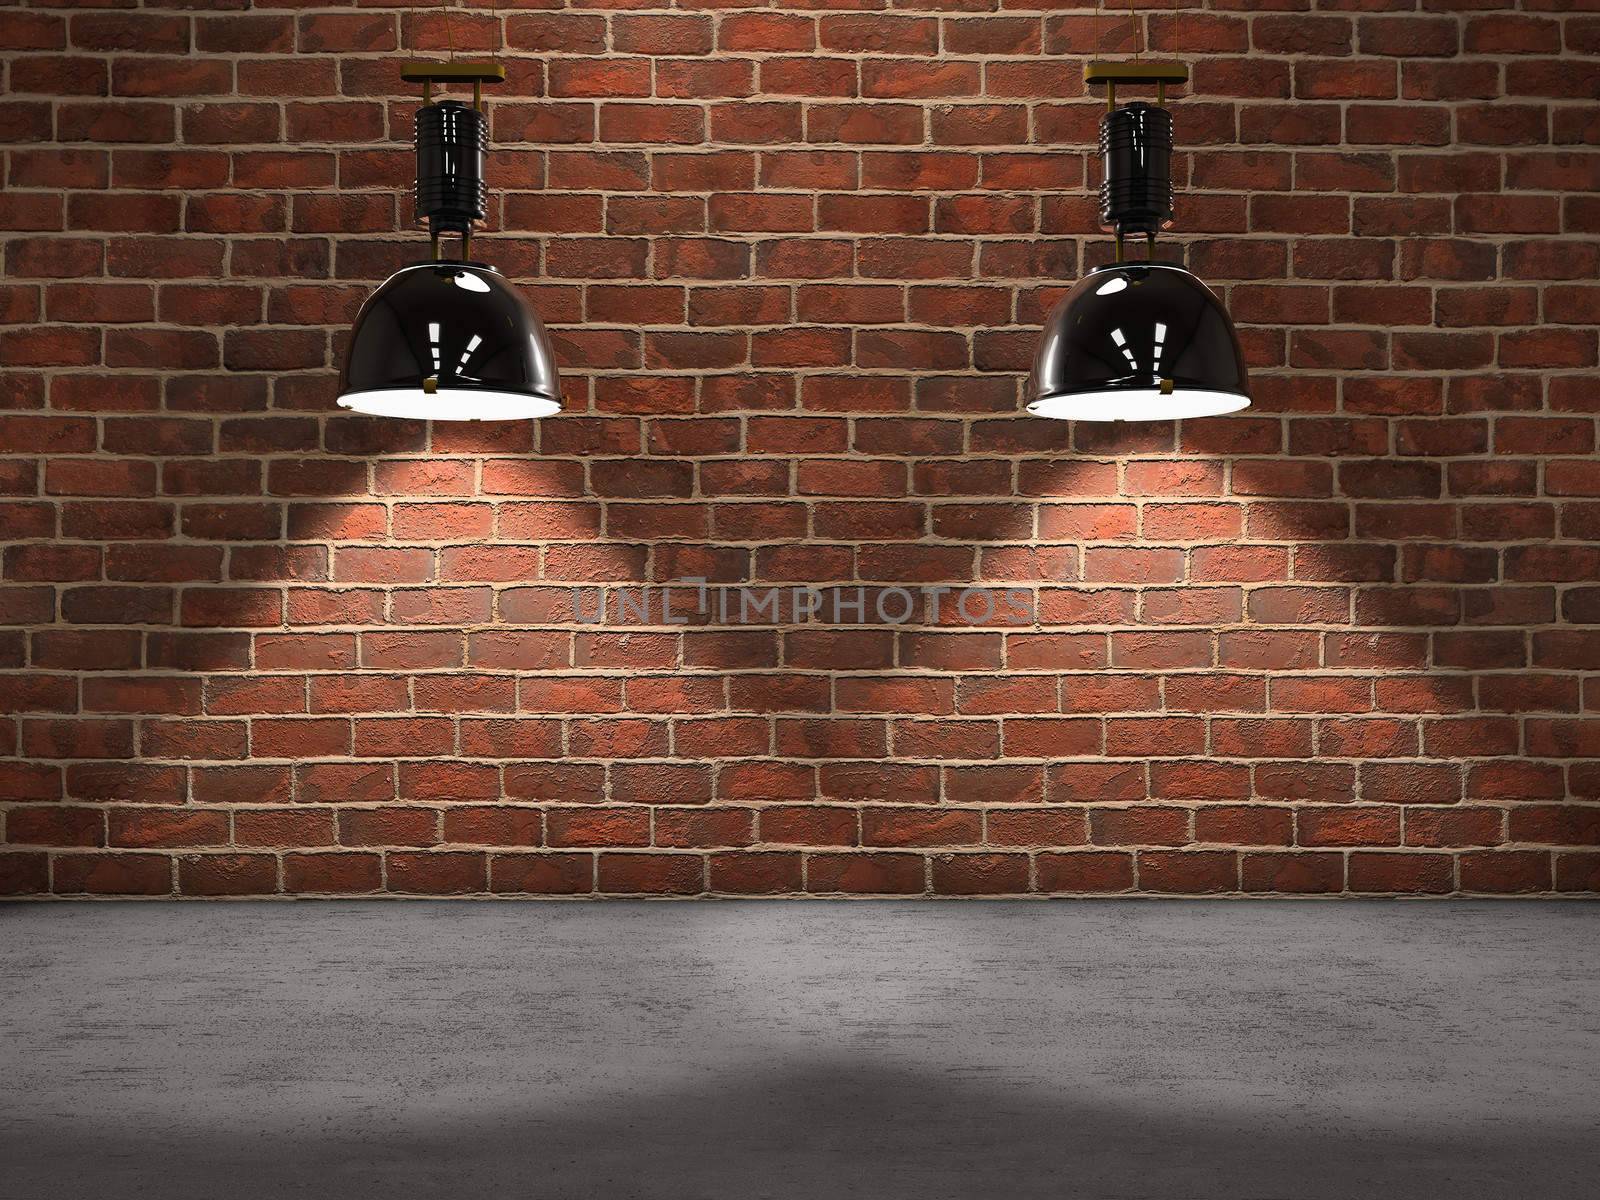 Lamps stage by dynamicfoto